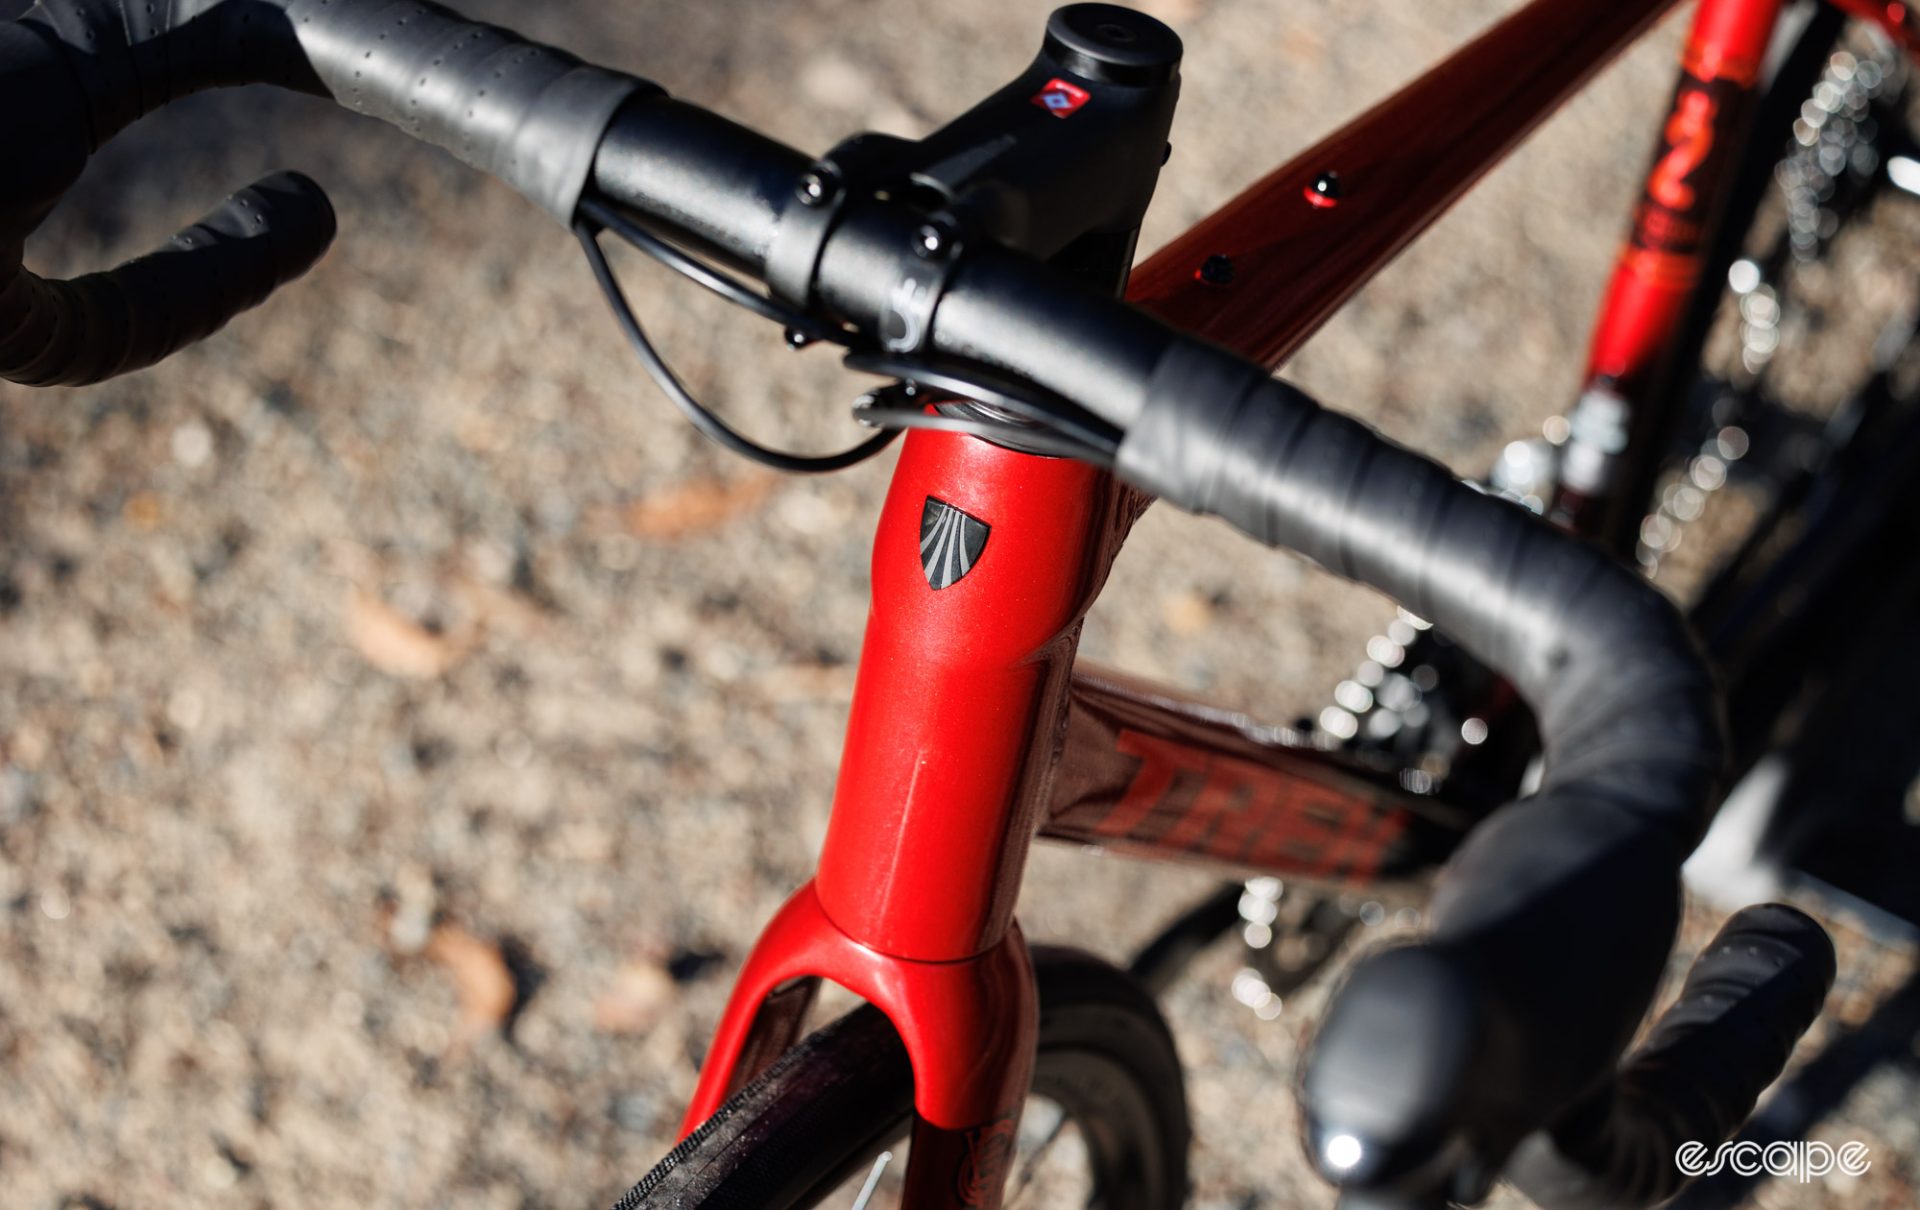 A front on view of the small head tube badge. 